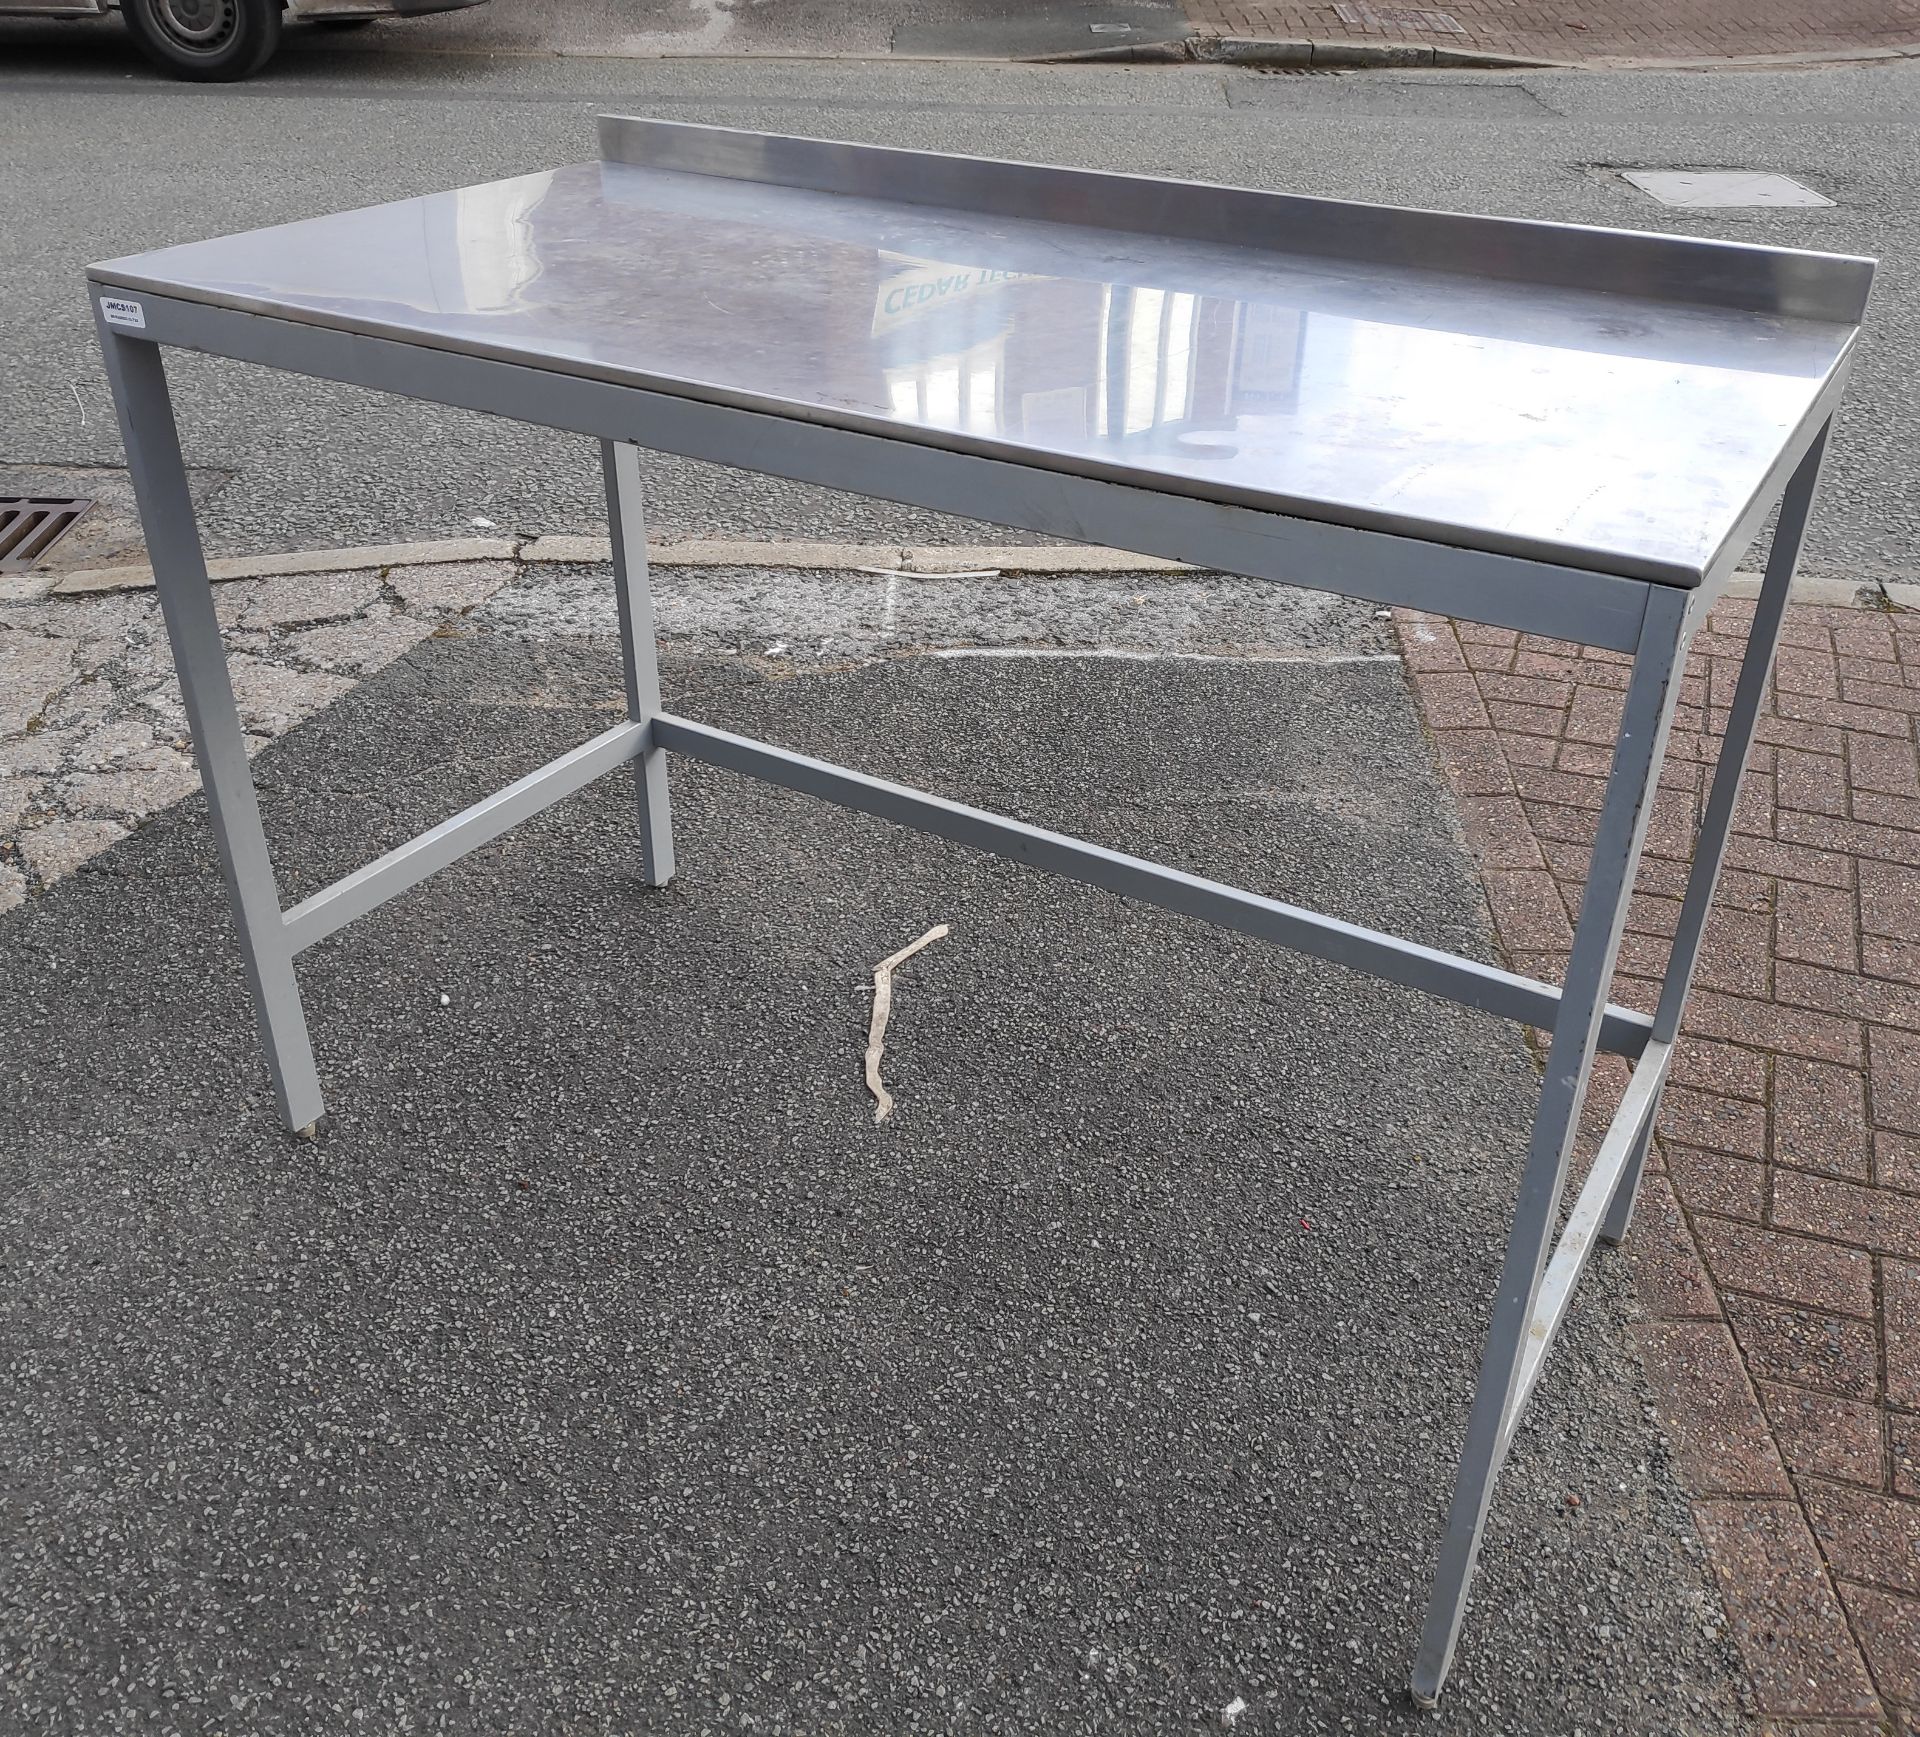 1 x Stainless Steel Prep Bench with Upstand - 126cm (L) x 64.5cm (D) x 95cm (H) - JMCS107 - CL723 -